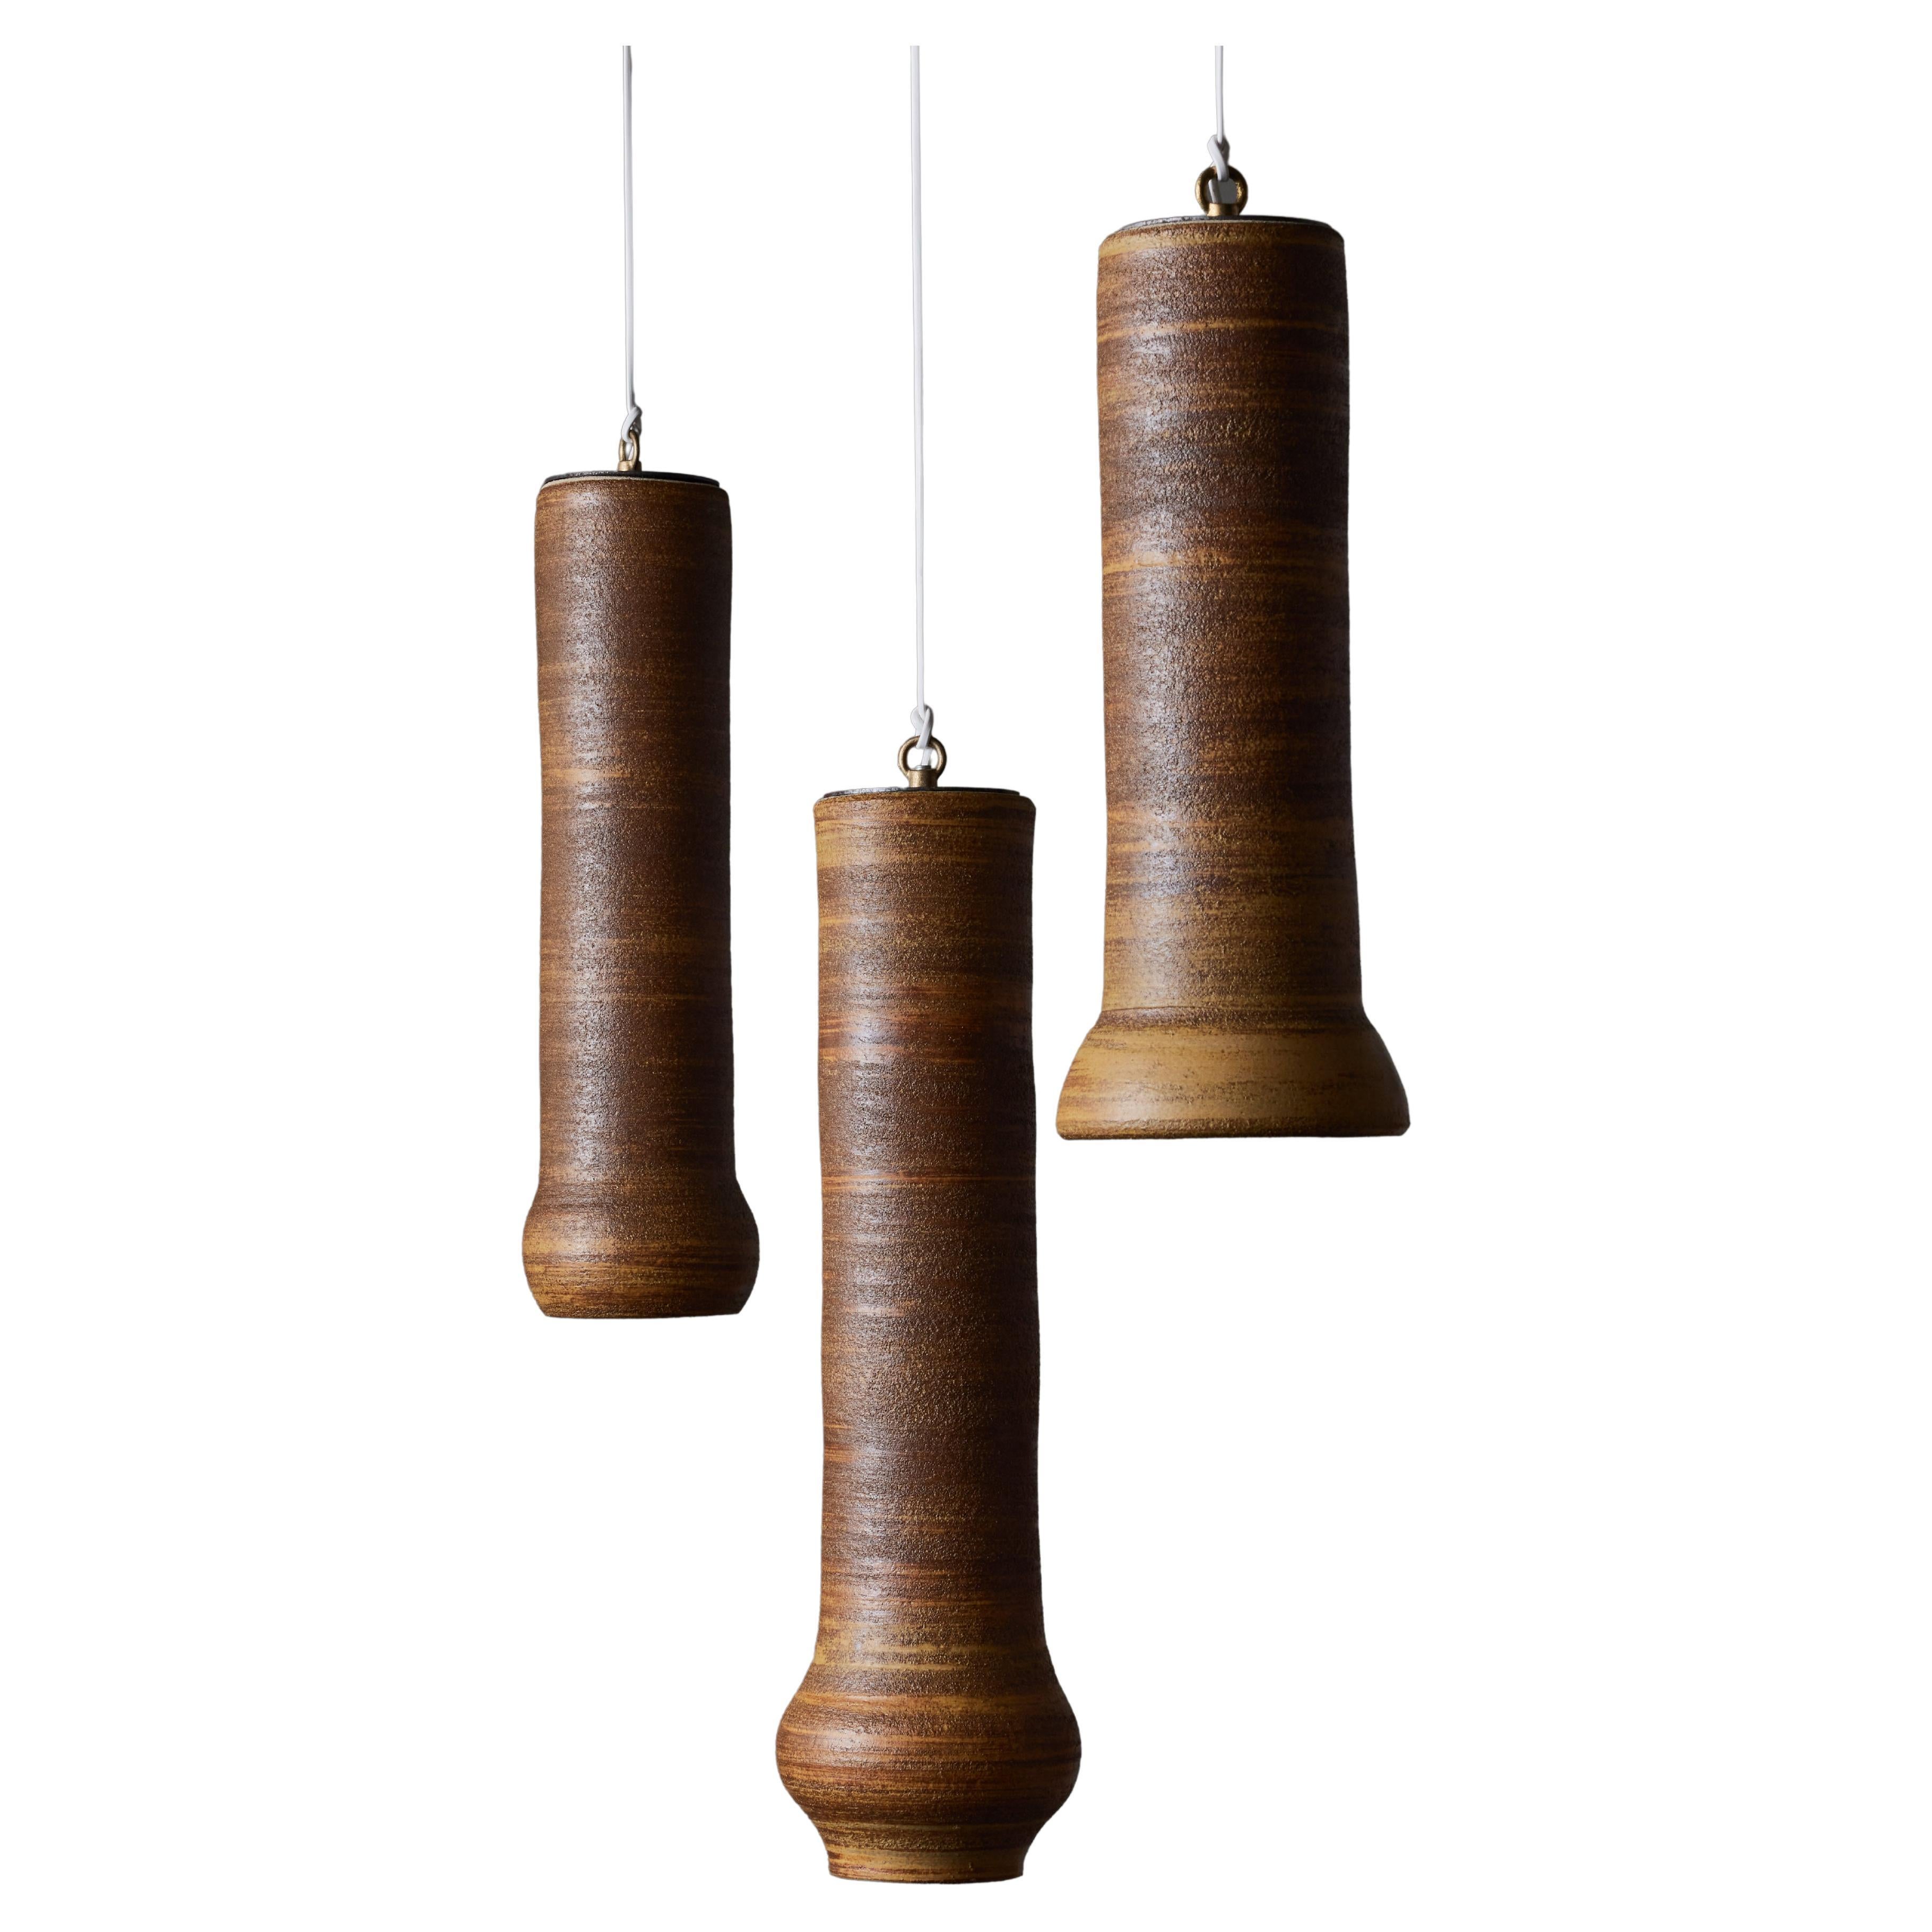 Set of Three Ceramic Suspensions by Jean and Claude Bersoux For Sale